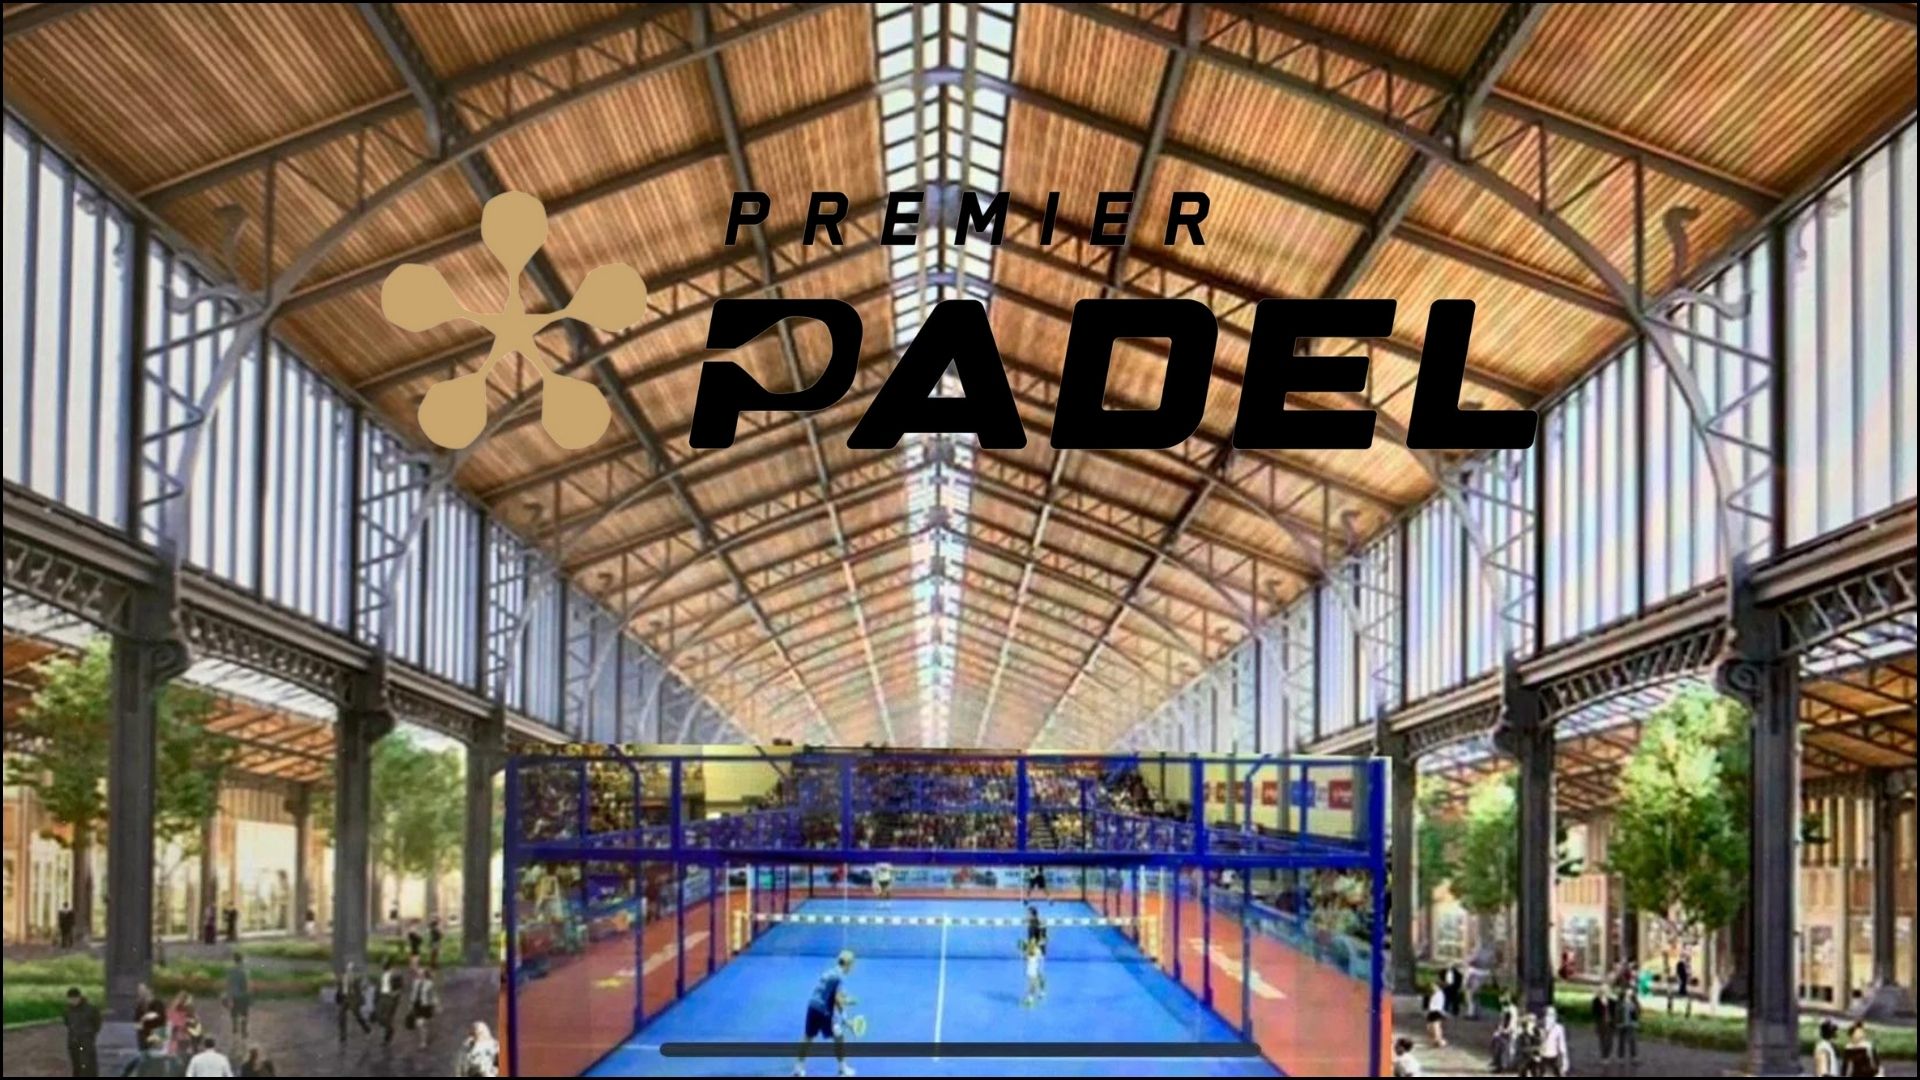 Lotto Brussels P2 – The renewal of padel male